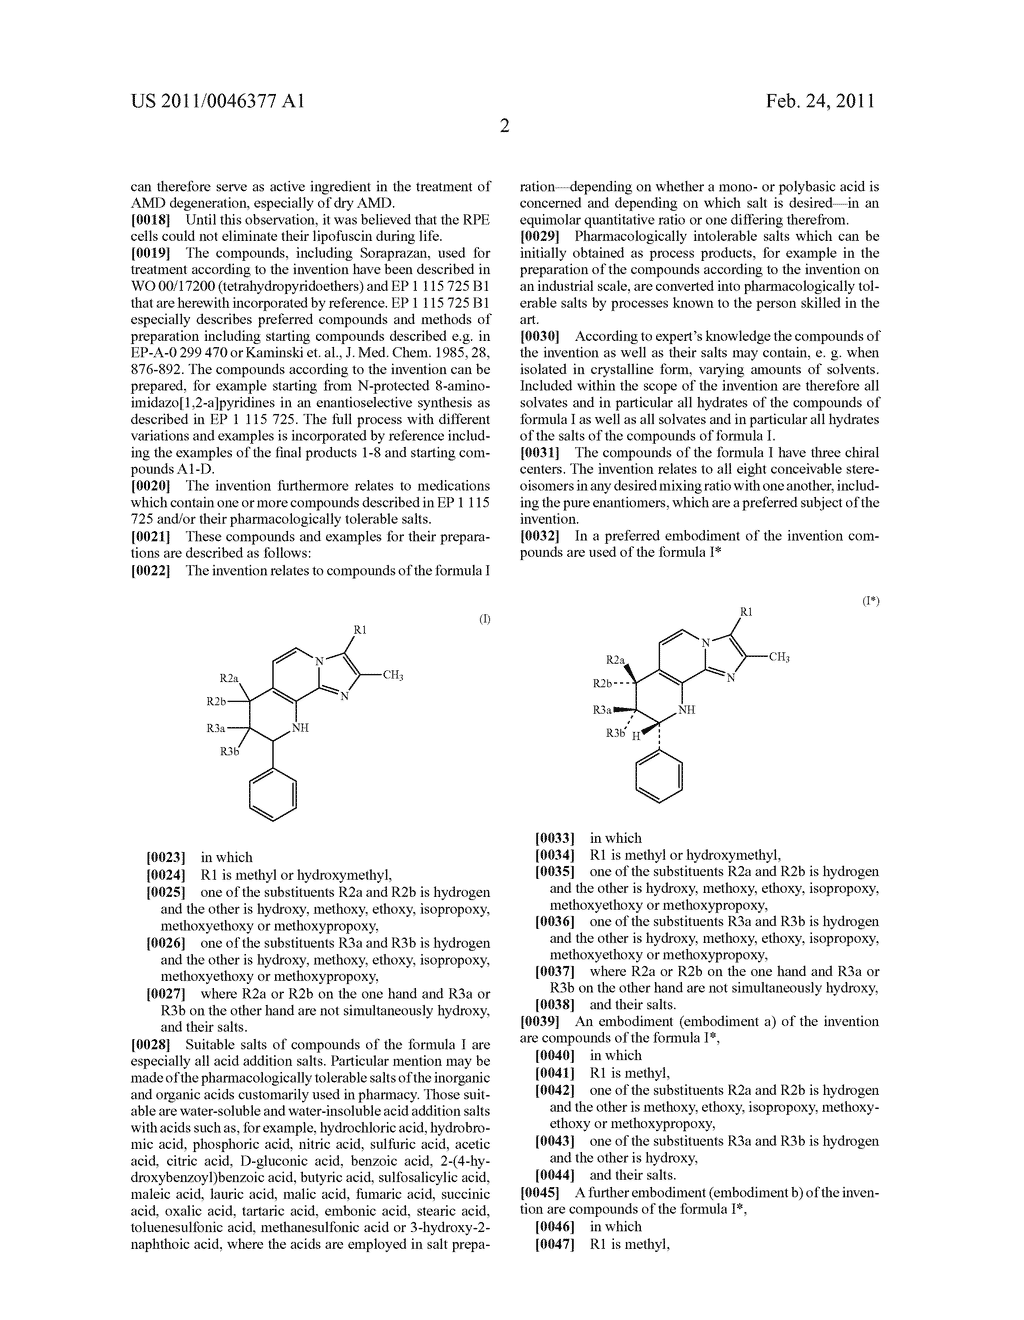 TETRAHYDROPYRIDOETHERS FOR TREATMENT OF AMD - diagram, schematic, and image 25